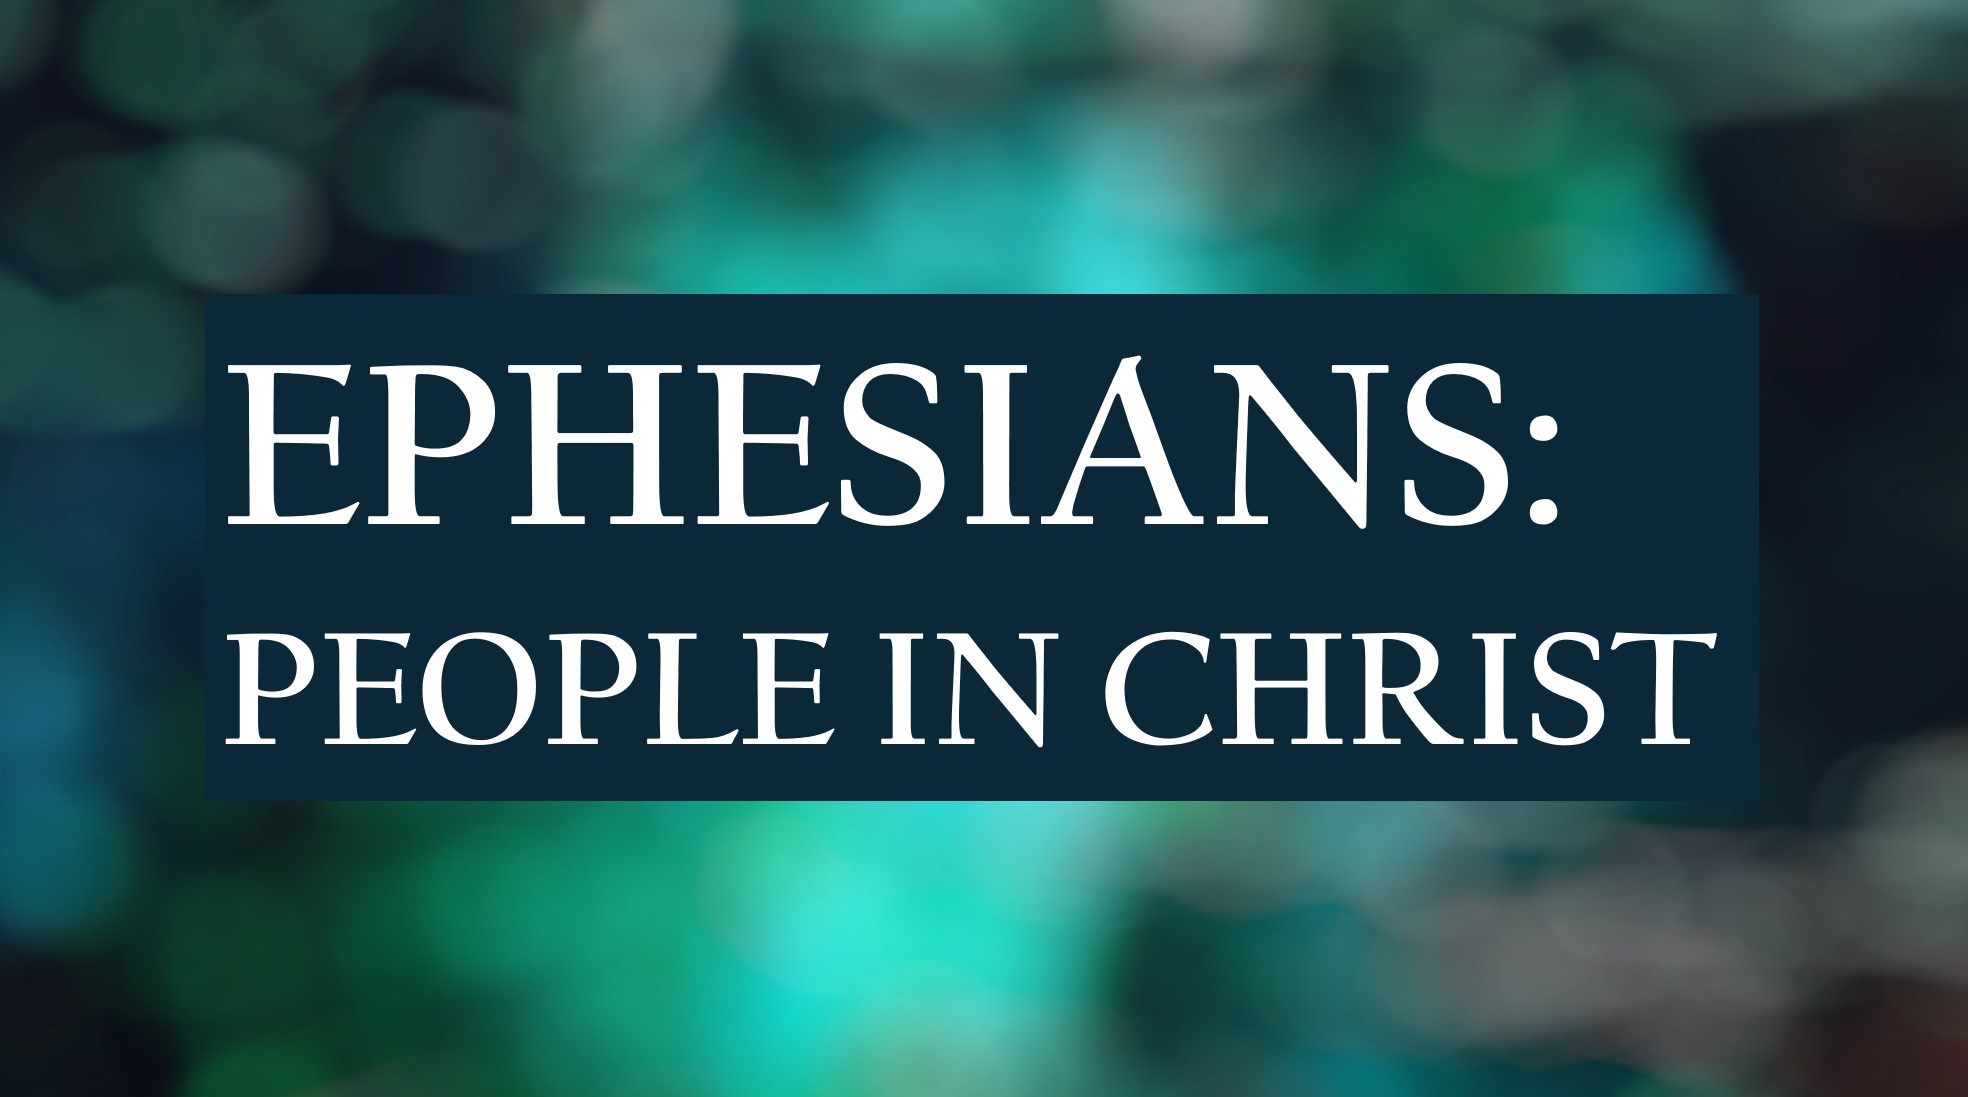 A Unified People in Christ